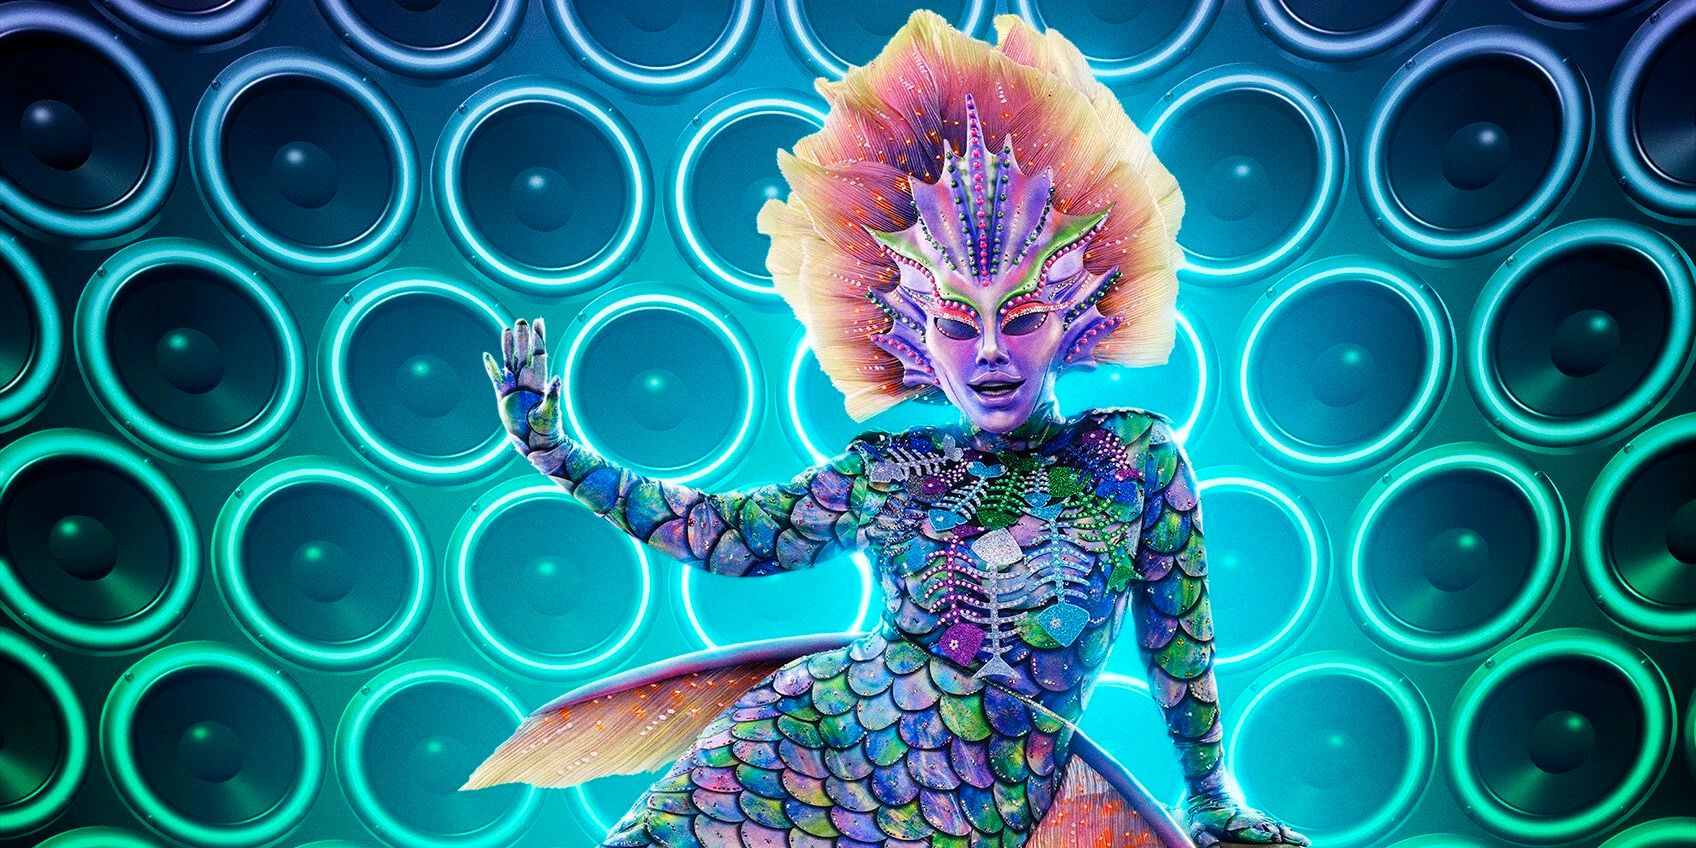 The Masked Singer: What We Know About Mermaid So Far